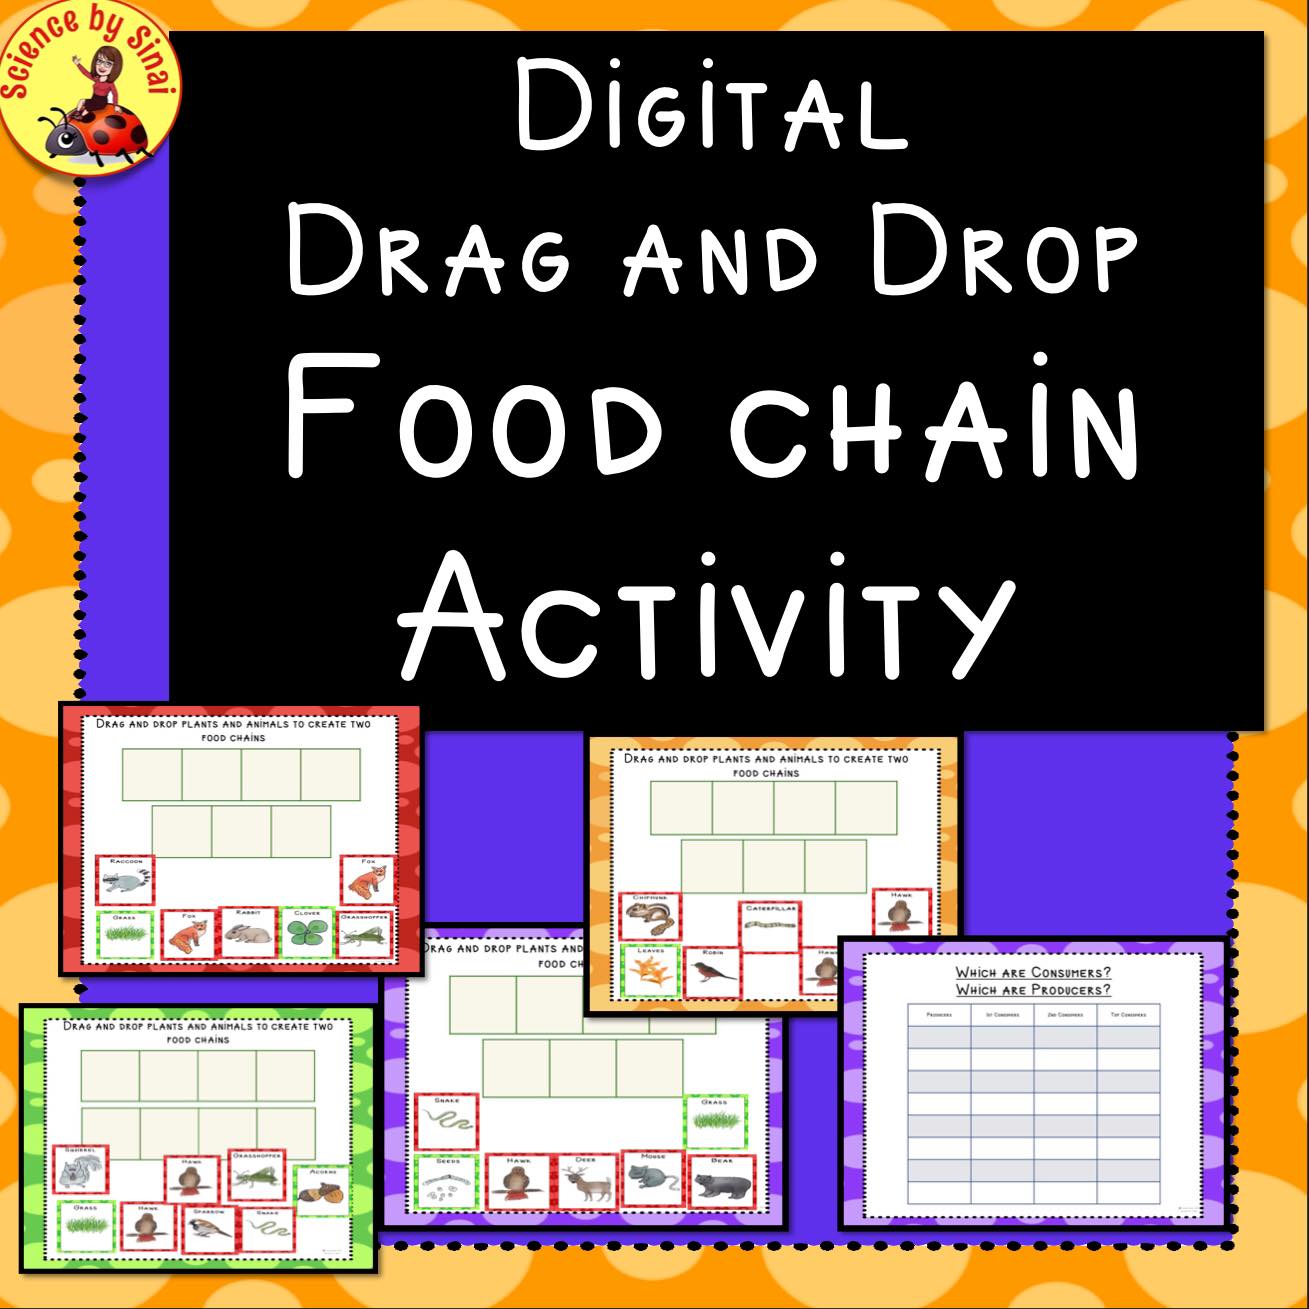 Digital Drag and Drop - Food Chain Activity